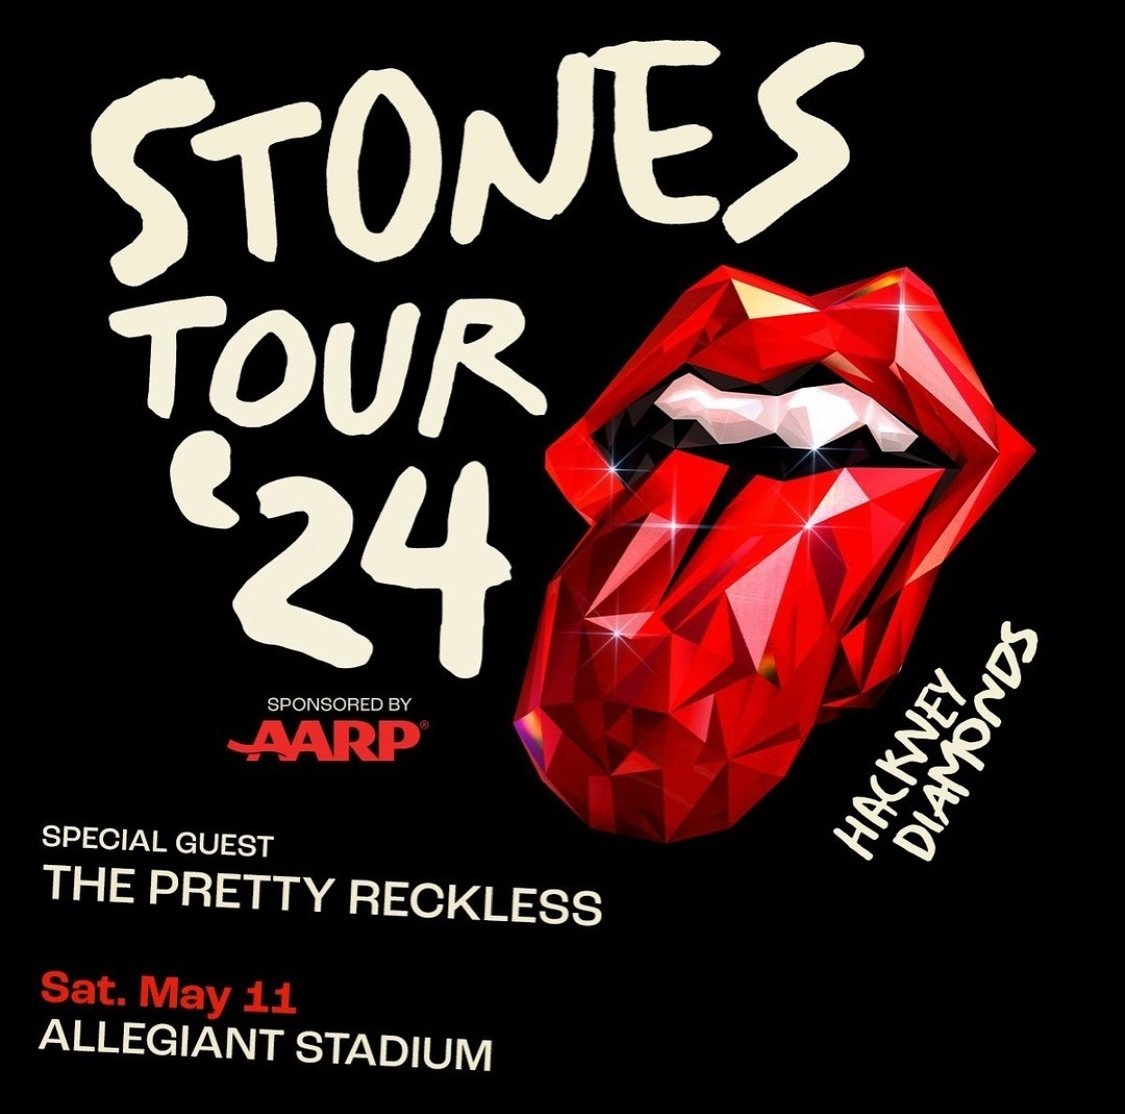 ROLLING STONES at Allegiant Stadium May 11! Take the easier way there and reserve your seat on one of our luxury buses to the show. 

🎶 Skip the lines! M Ride has exclusive stadium drop off and pickup locations a short walk from the entrance. 

🎶 A